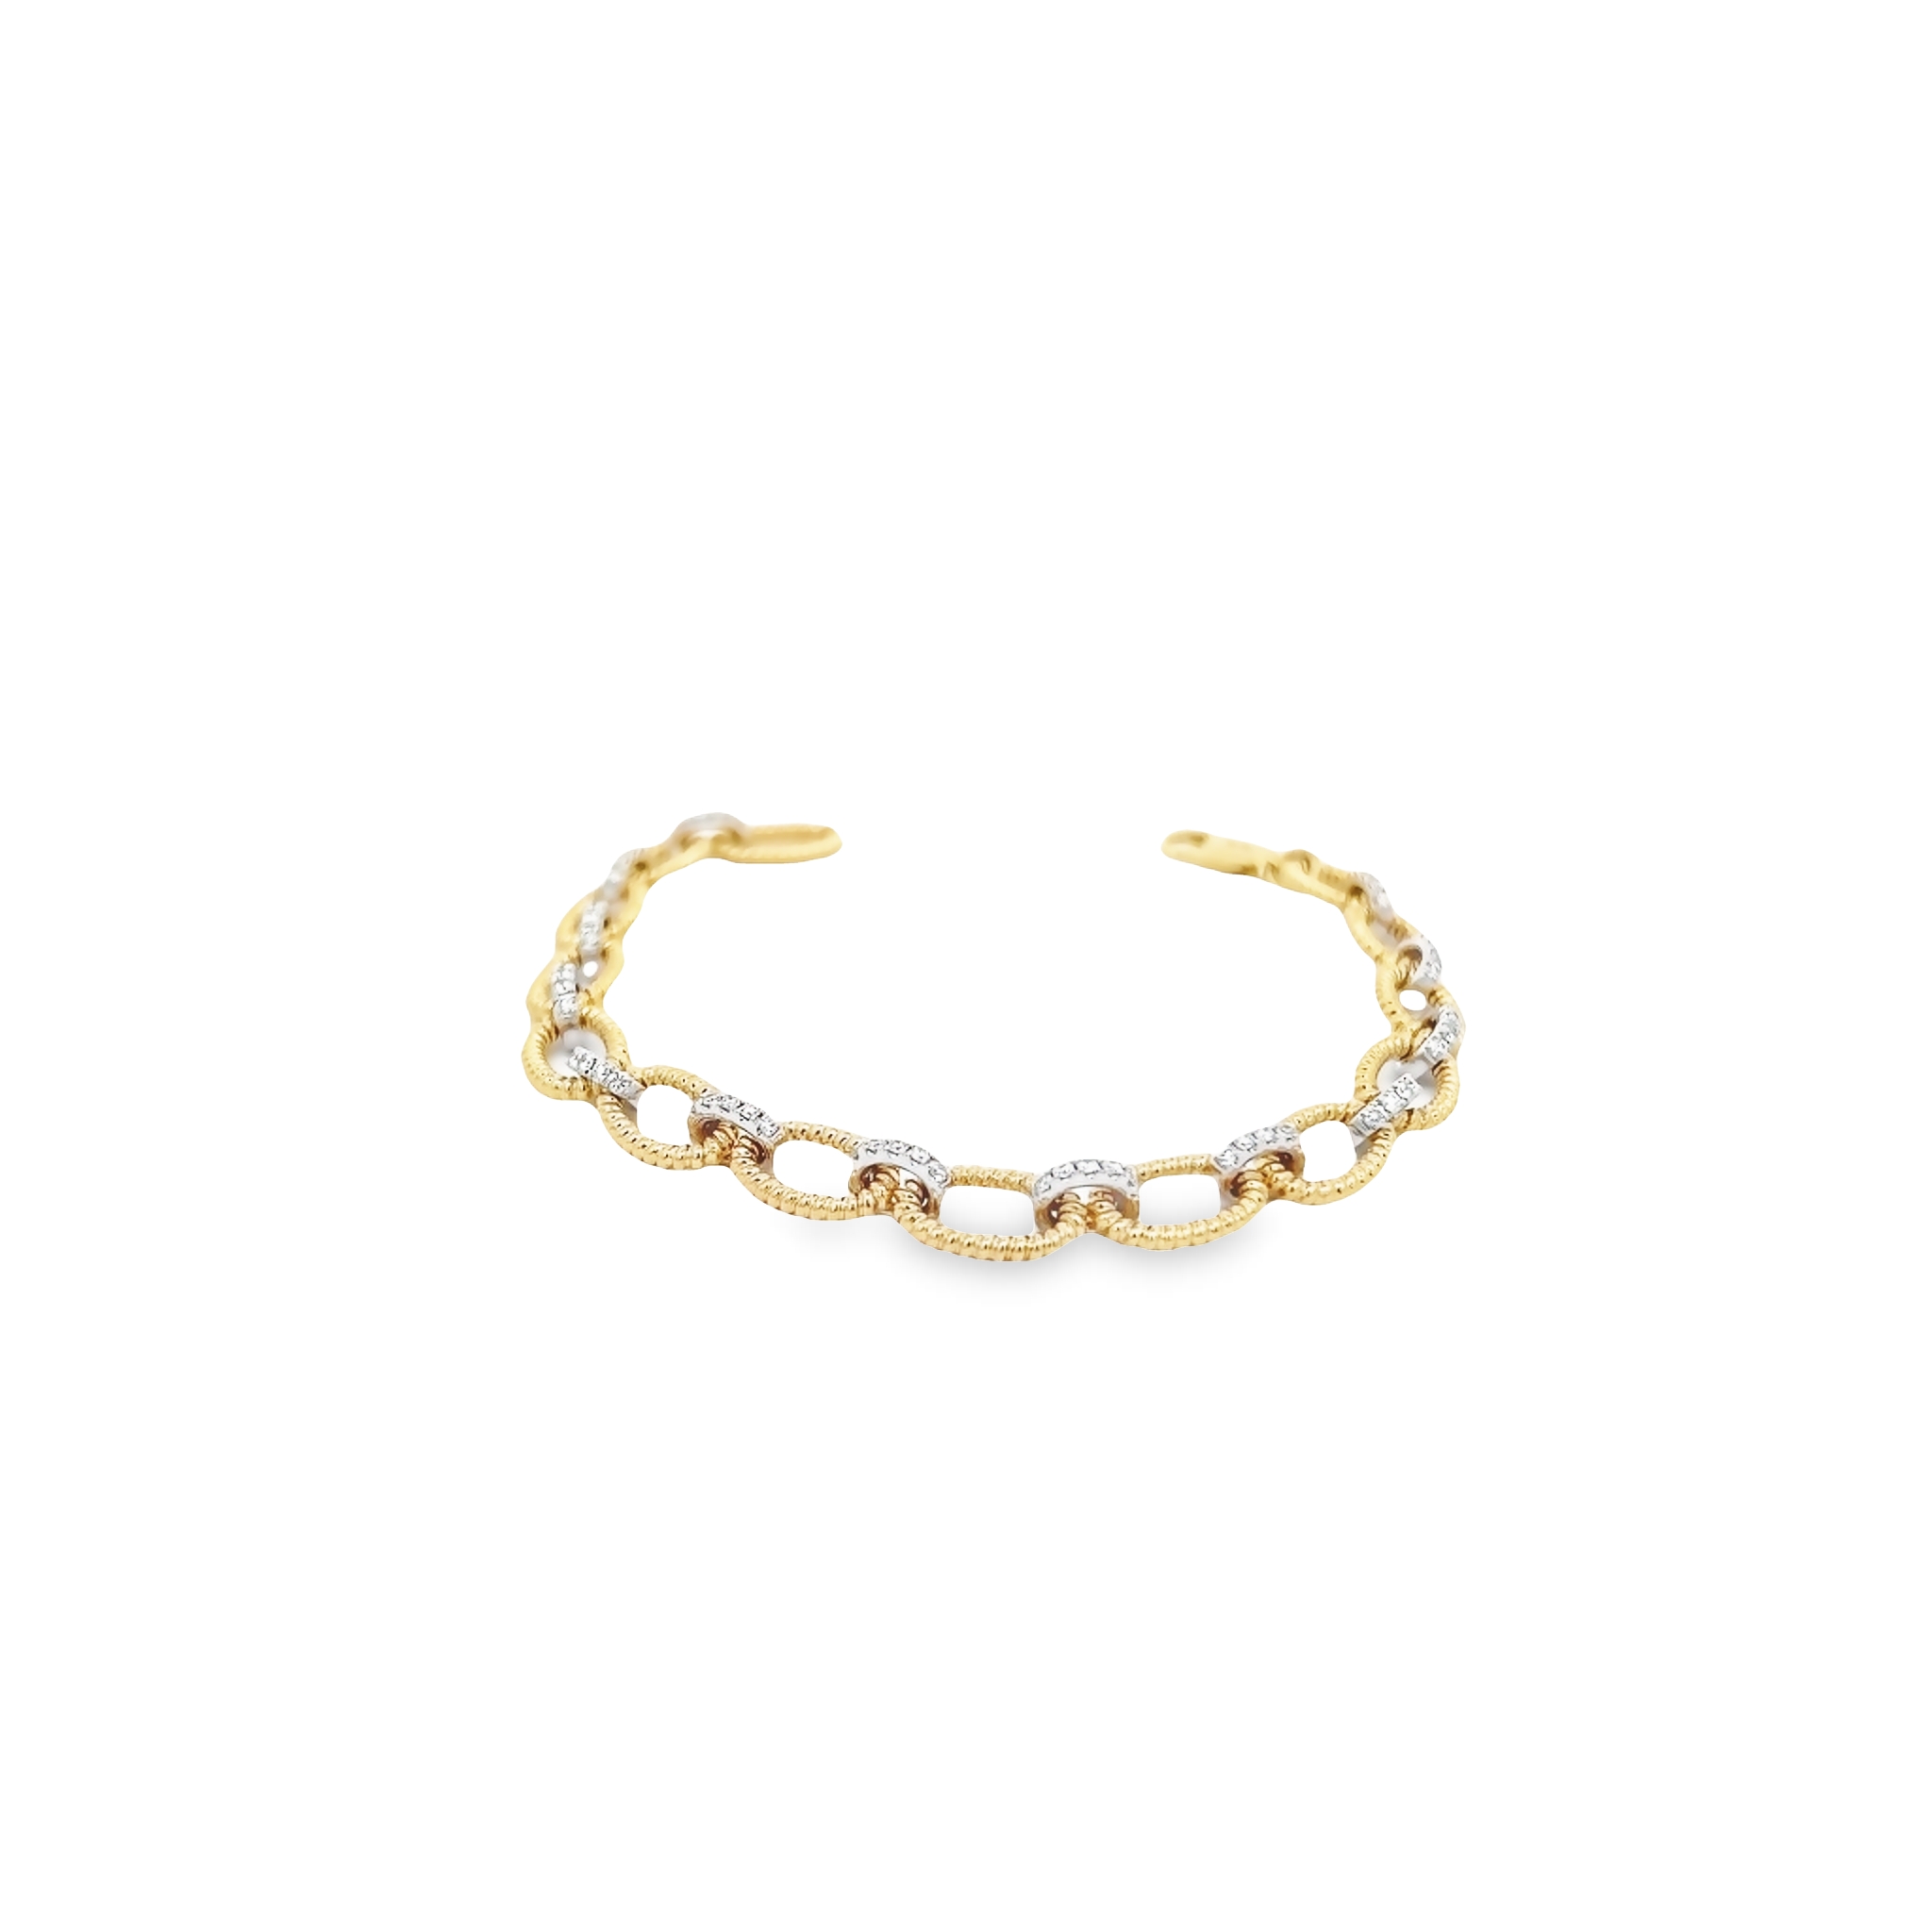 14 Karat yellow gold oval link bracelet with 65=0.60 total weight round brilliant G VS Diamonds set in white gold.